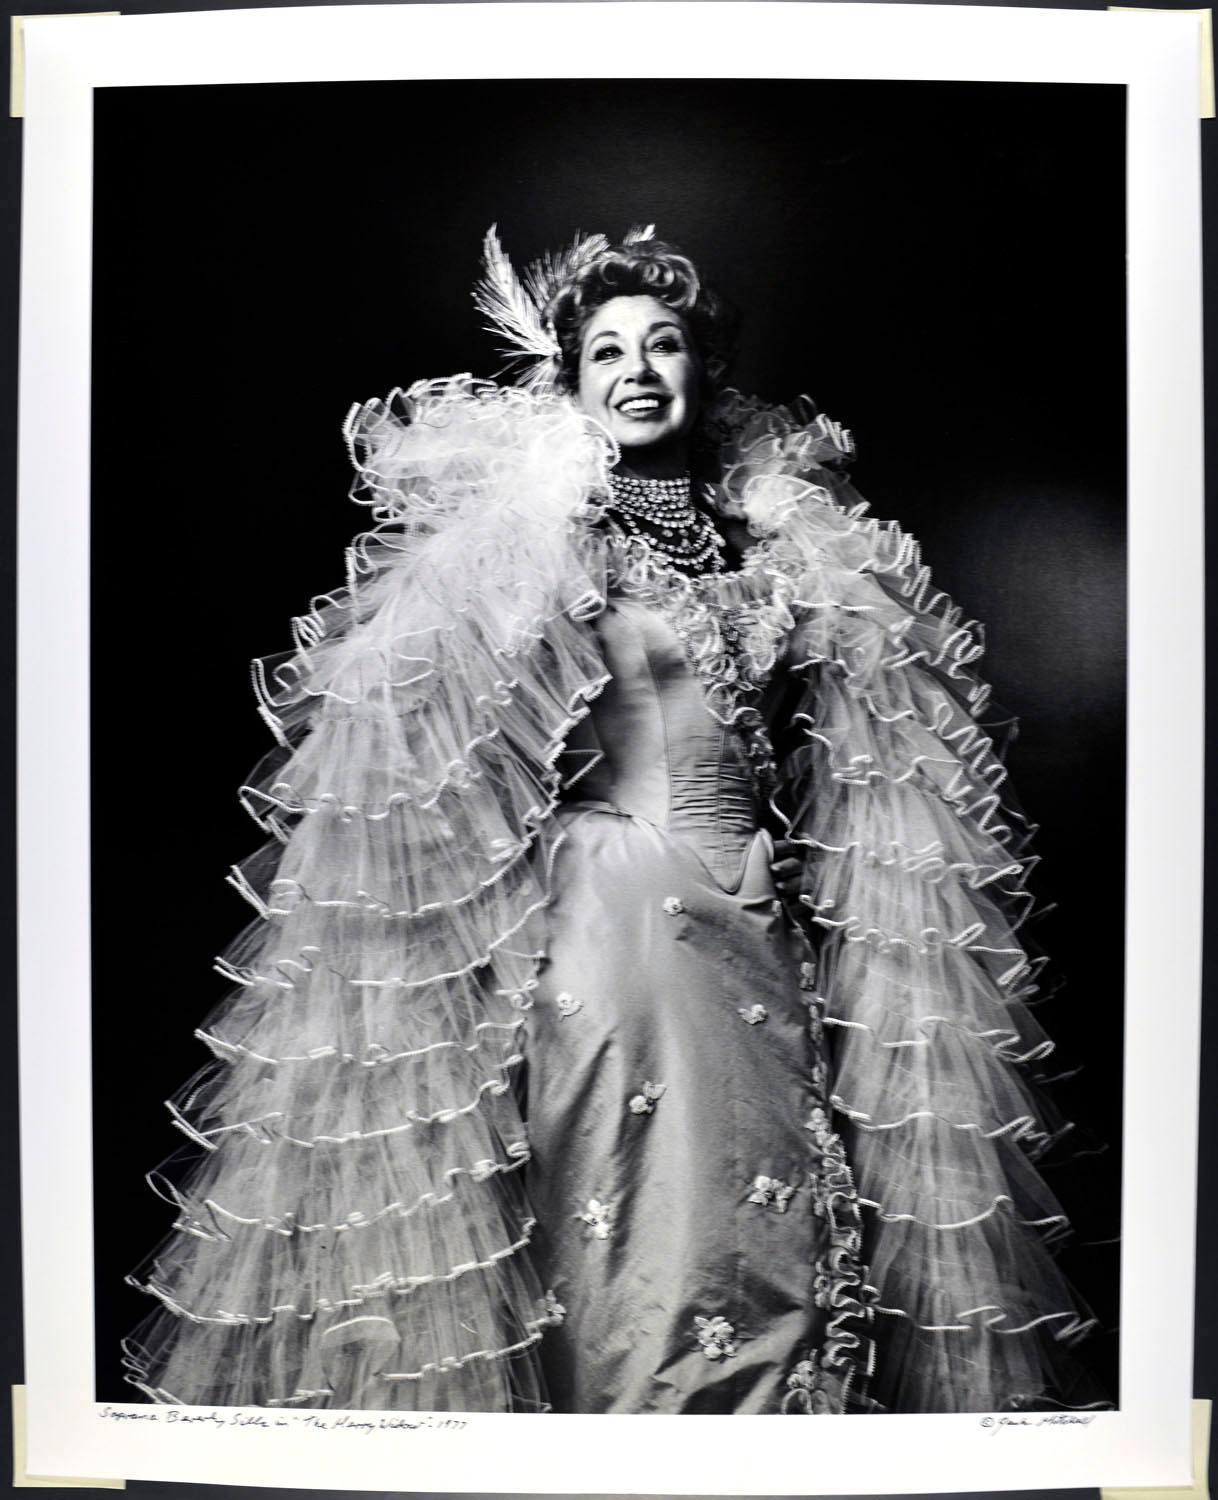 16 x 20" vintage silver gelatin photograph of operatic soprano Beverly Sills in costume for  'The Merry Widow', photographed in 1977. It is signed by Jack Mitchell on the recto and in pencil on the verso. Comes directly from the Jack Mitchell